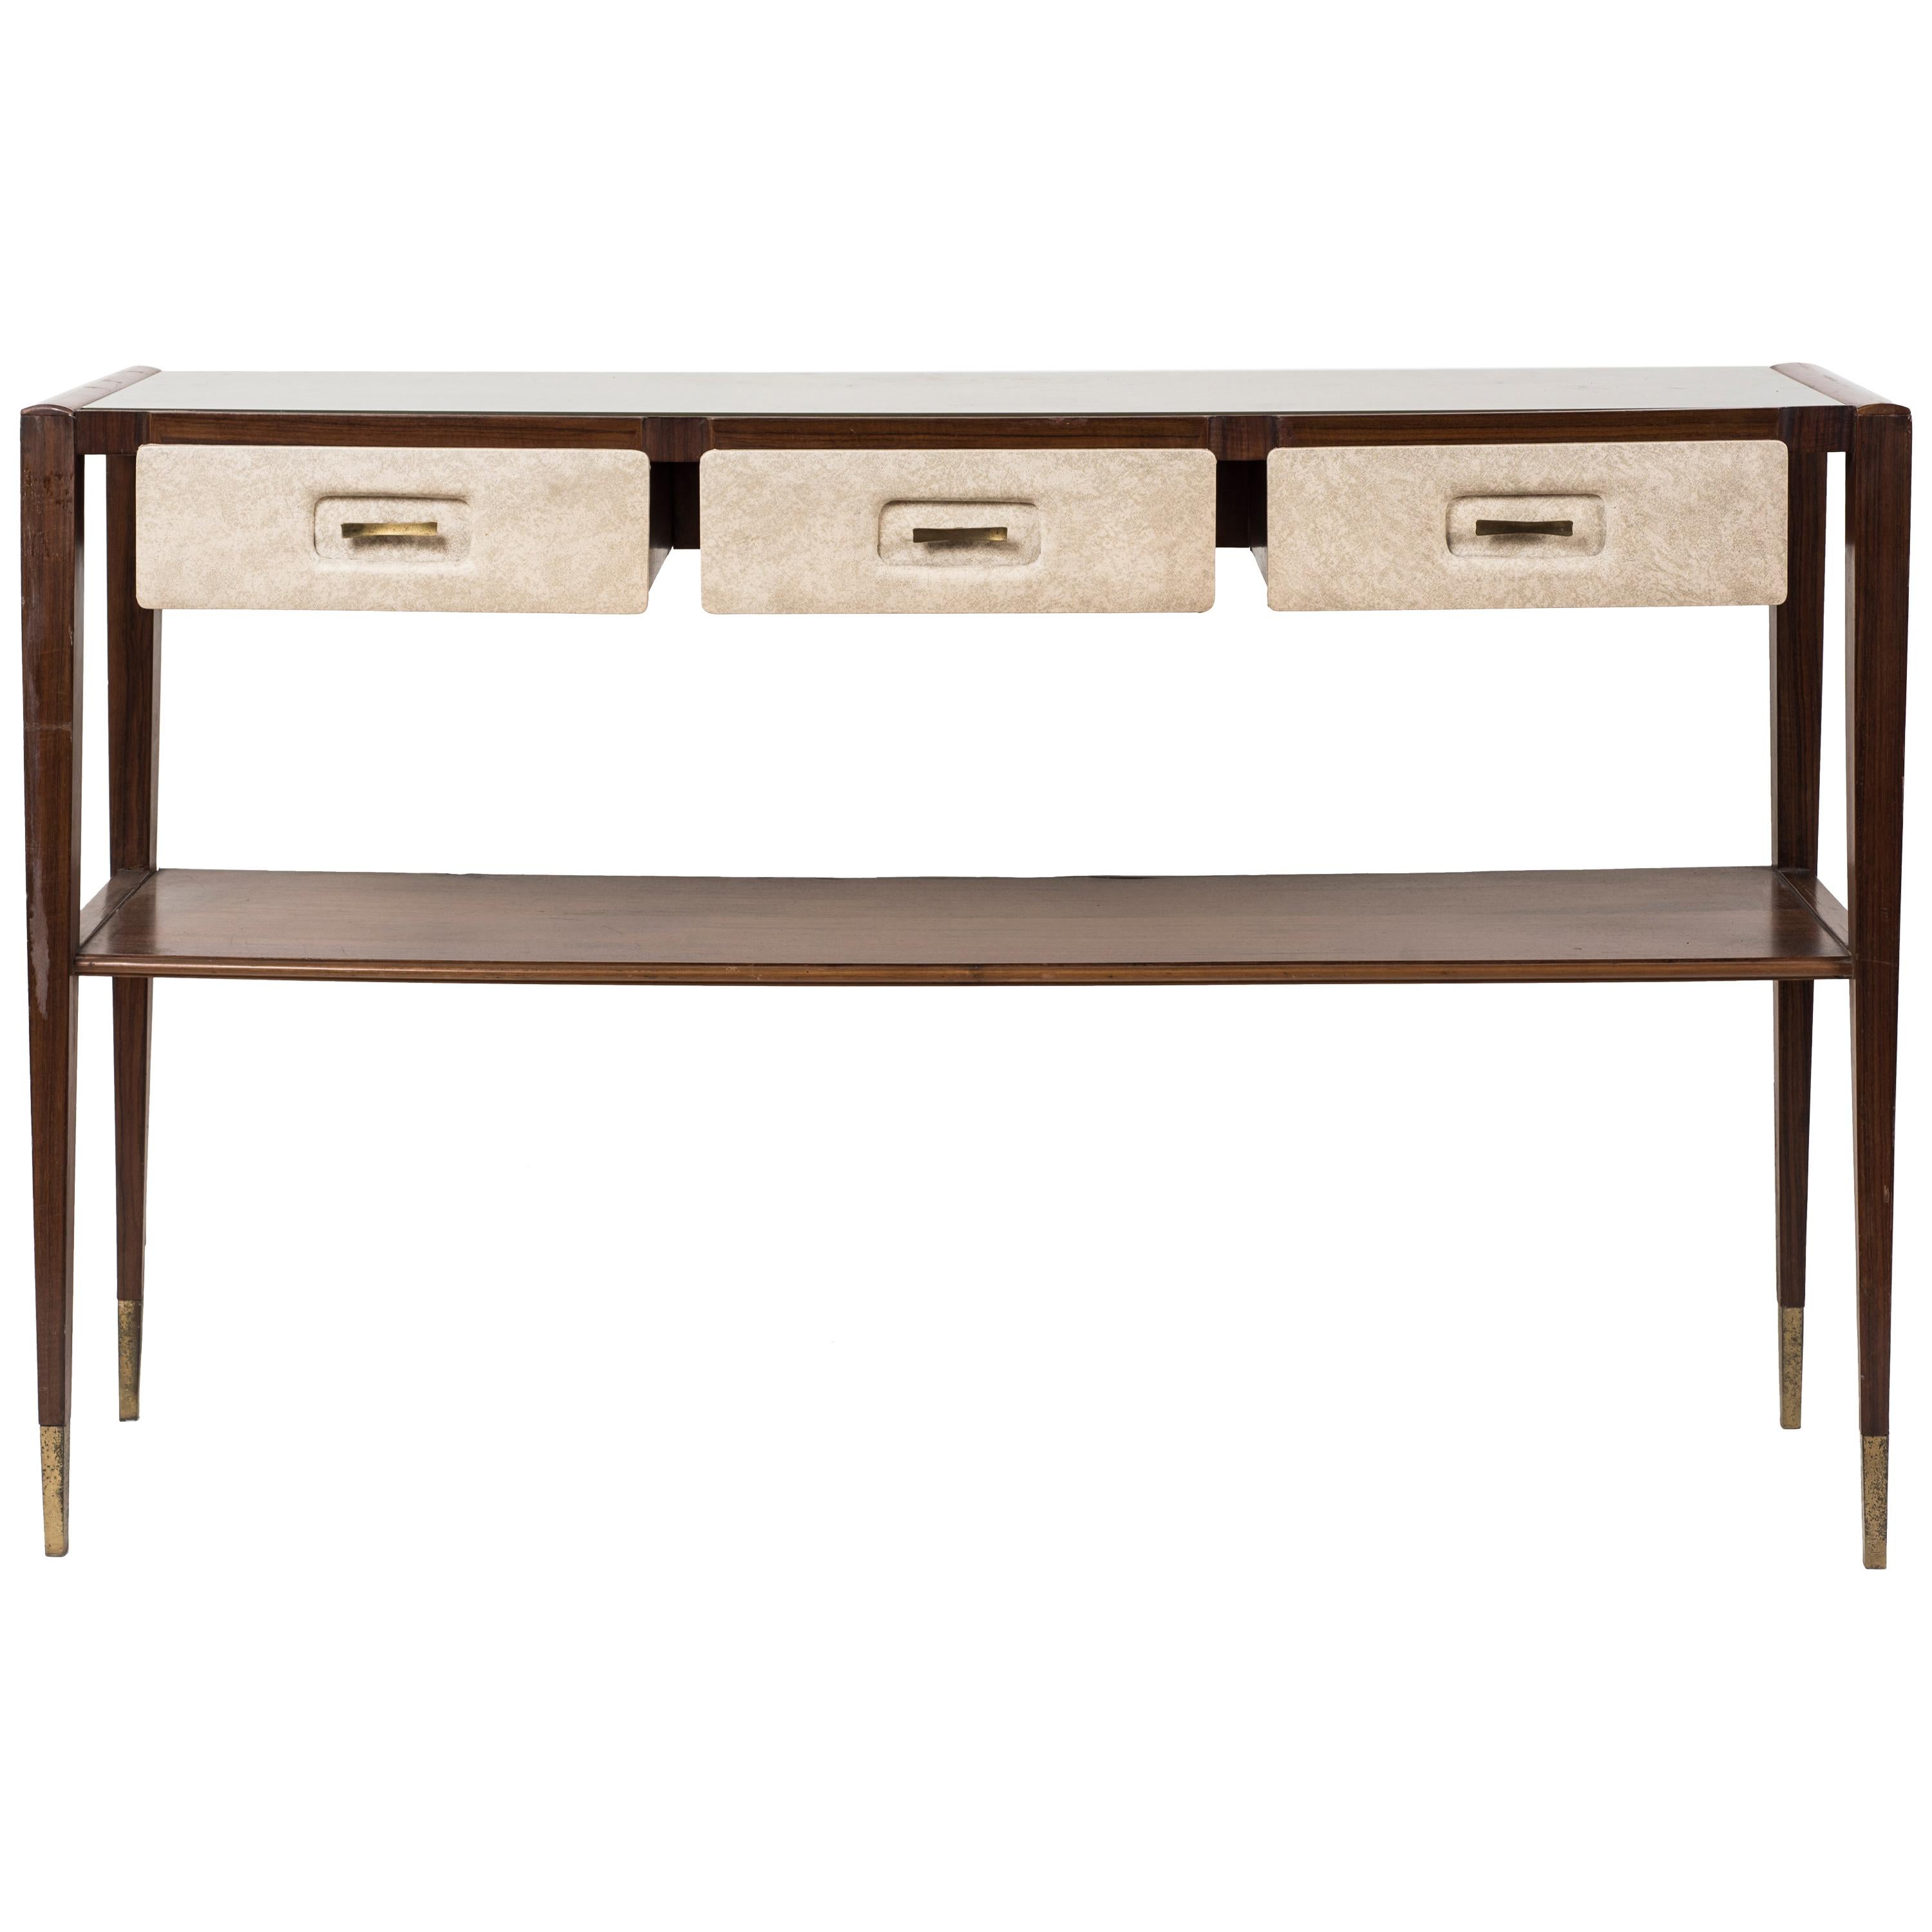 Vintage Wooden Console by Italian Architect and Designer Giò Ponti, 1950s